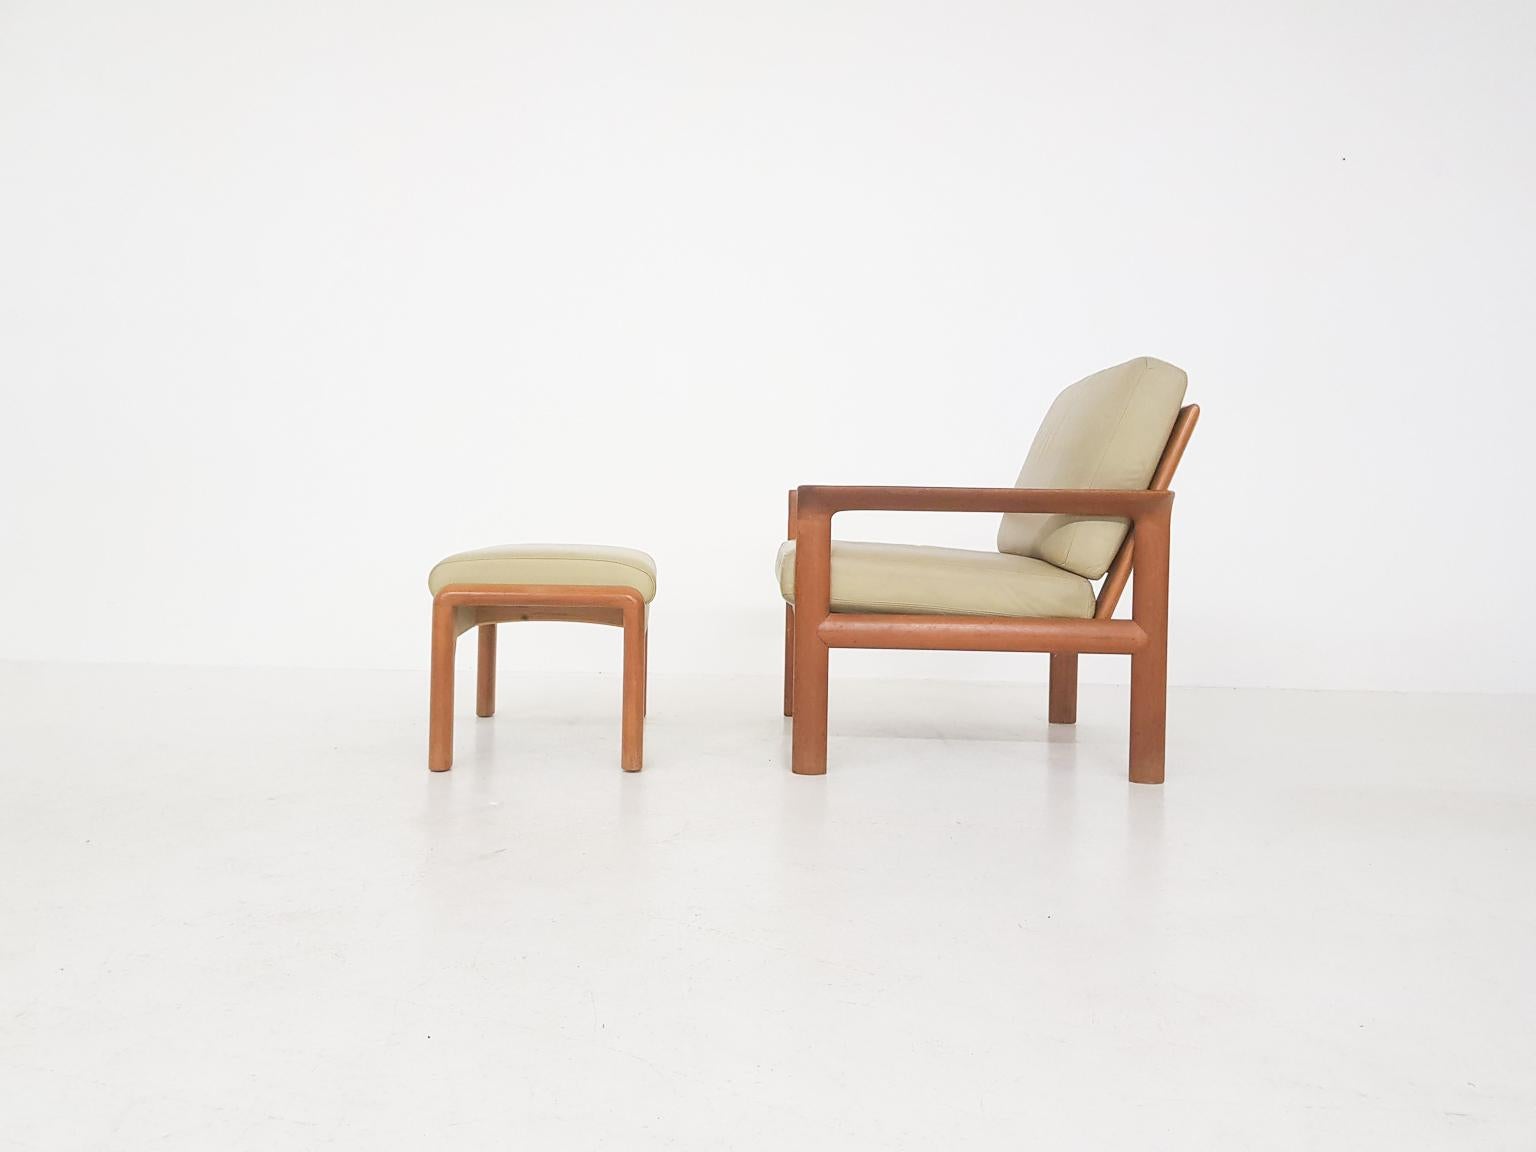 Leather and teak lounge chair and ottoman by Sven Ellekaer for Komfort, Denmark 1960s.

Beatiful lounge or arm chair and ottoman from Denmark. Lounge chair and ottoman are designed by Sven Ellekaer and are part of the 